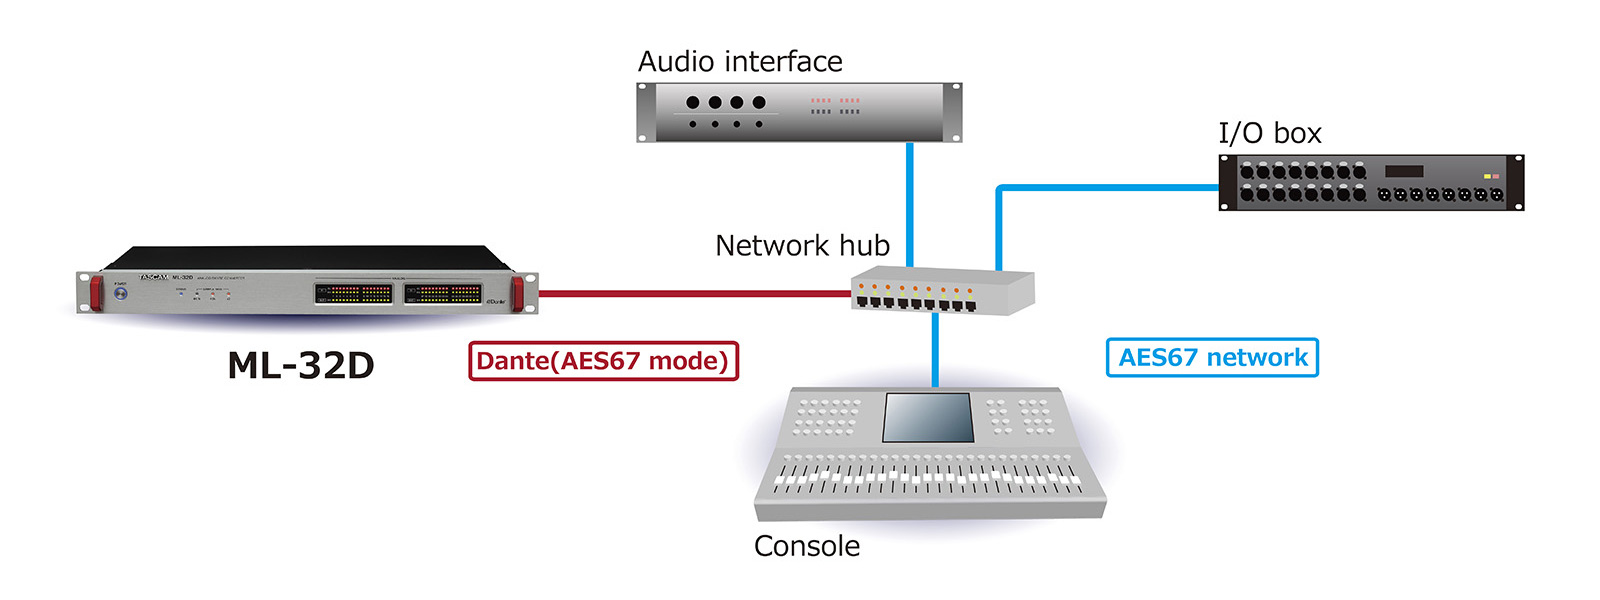 Possible to interconnect with AES67 and Ravenna systems